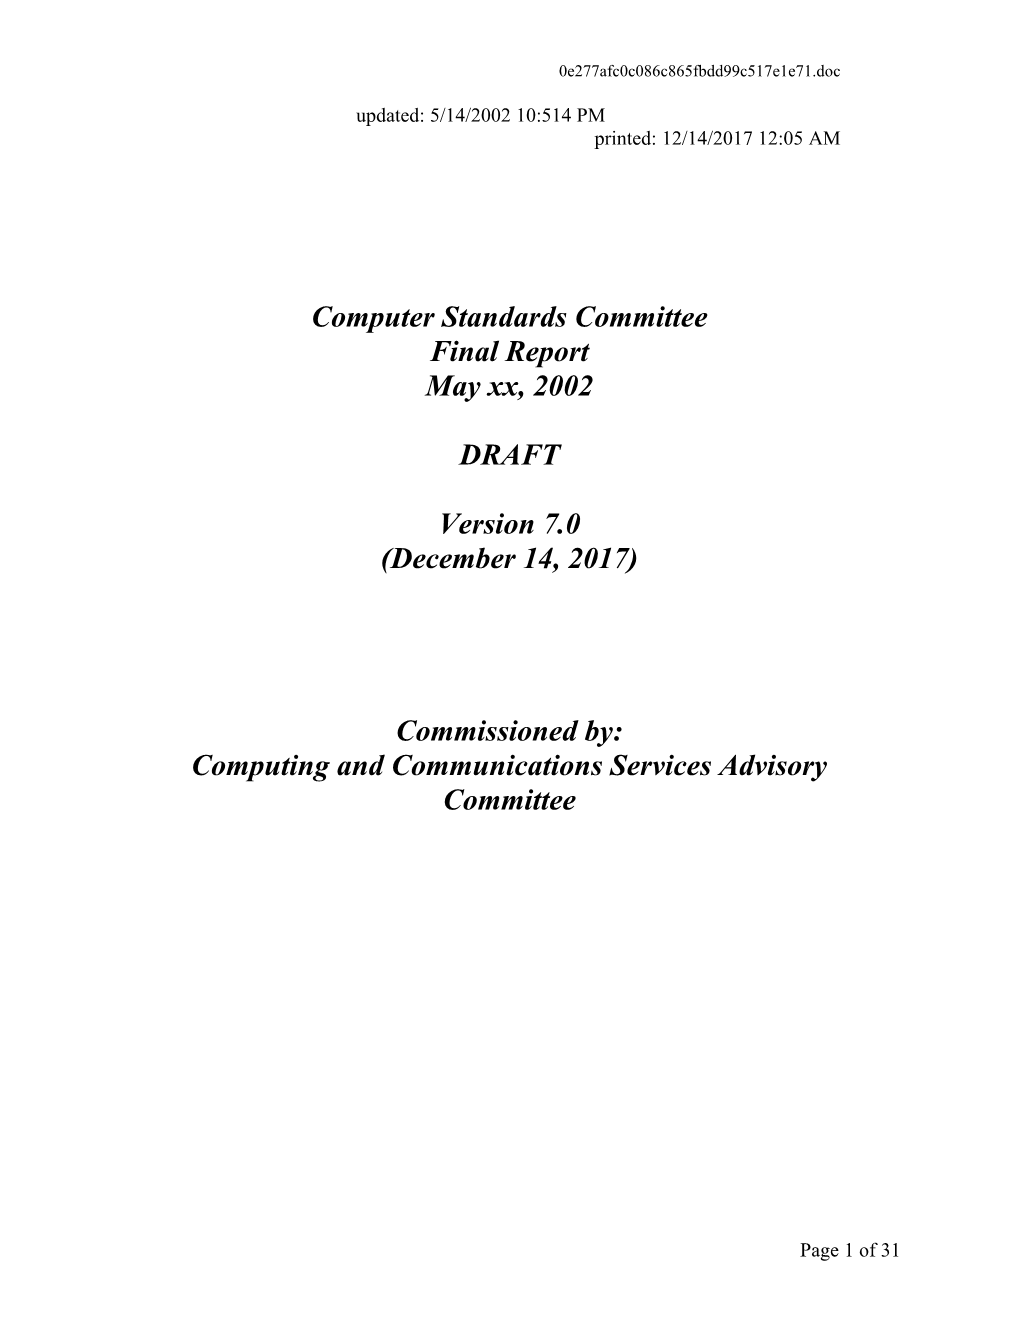 Computer Standards Committee Report - V2